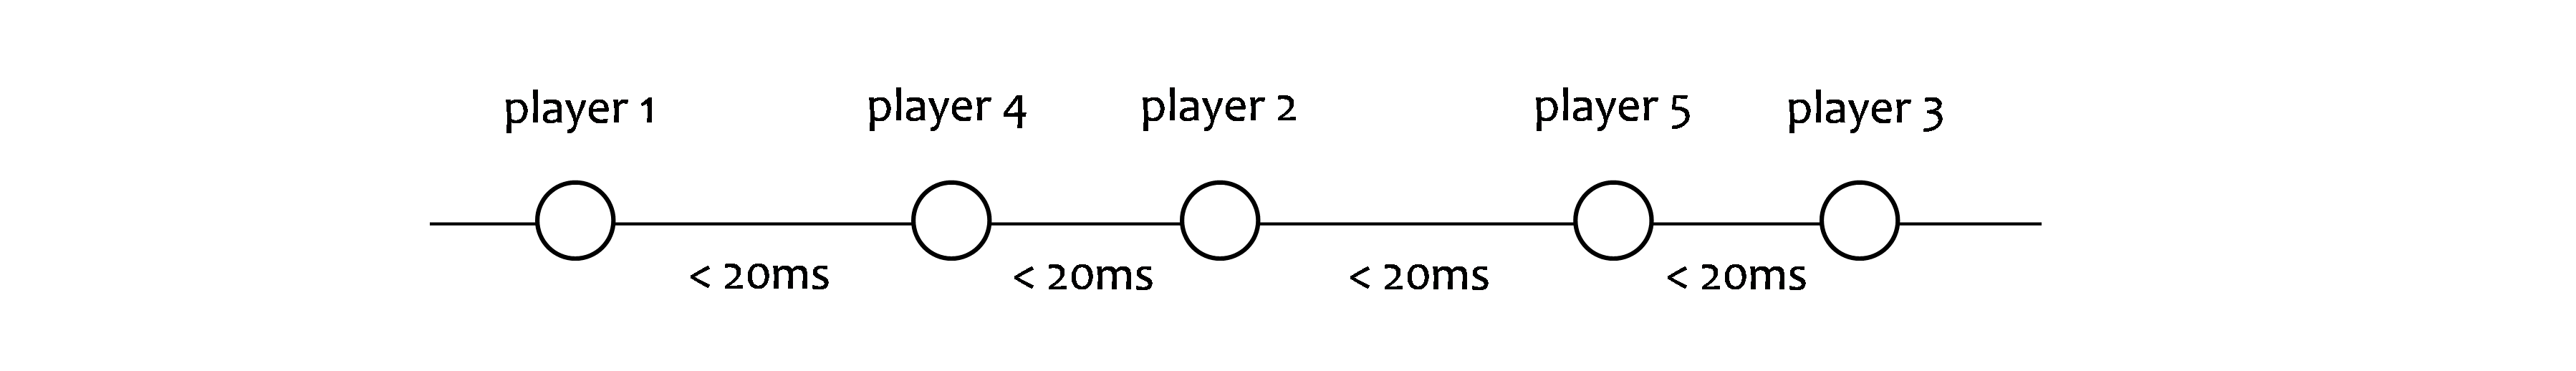 Image showing five circles on a line, labeled player 1, 4, 2, 5, and 3 from left to right. The spaces in between are labeled 'less than 20ms'